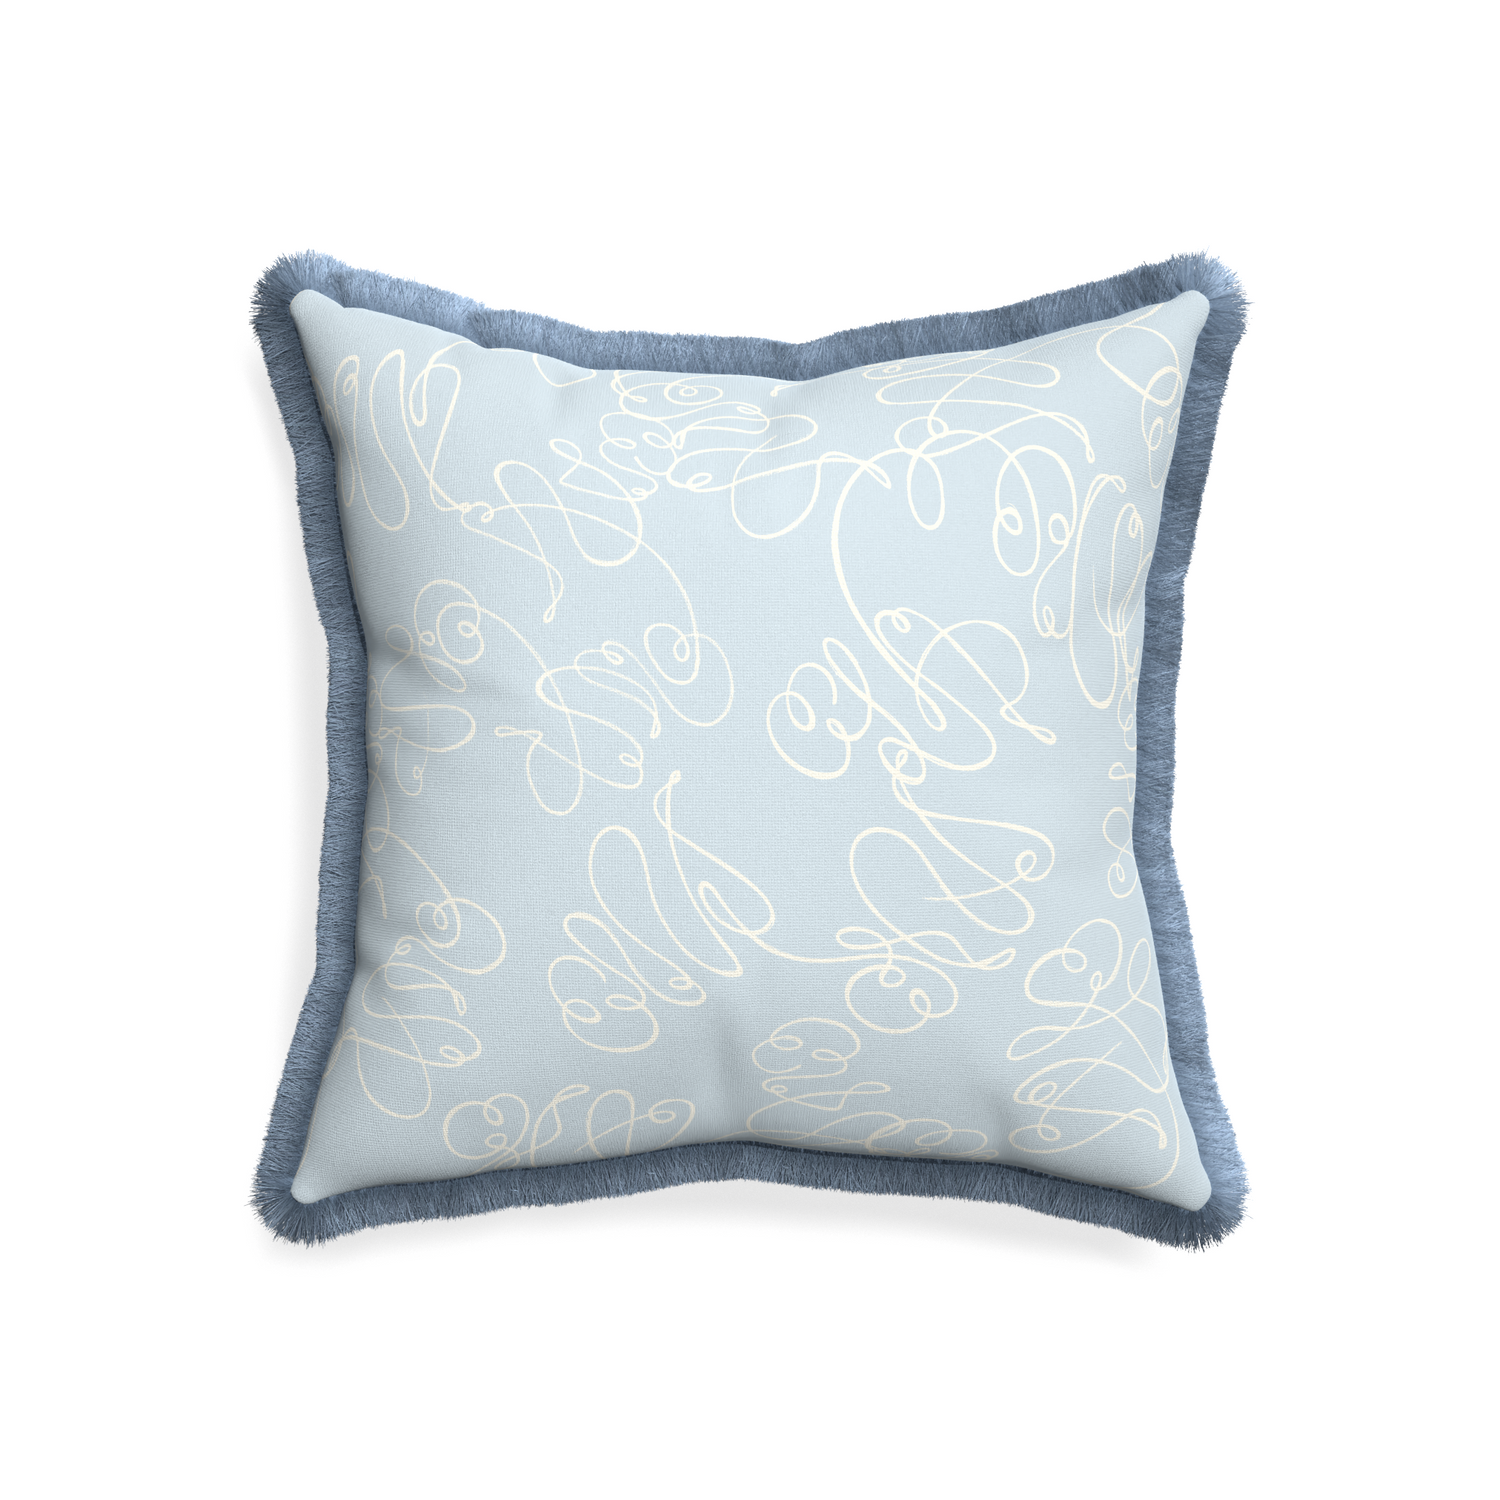 20-square mirabella custom powder blue abstractpillow with sky fringe on white background